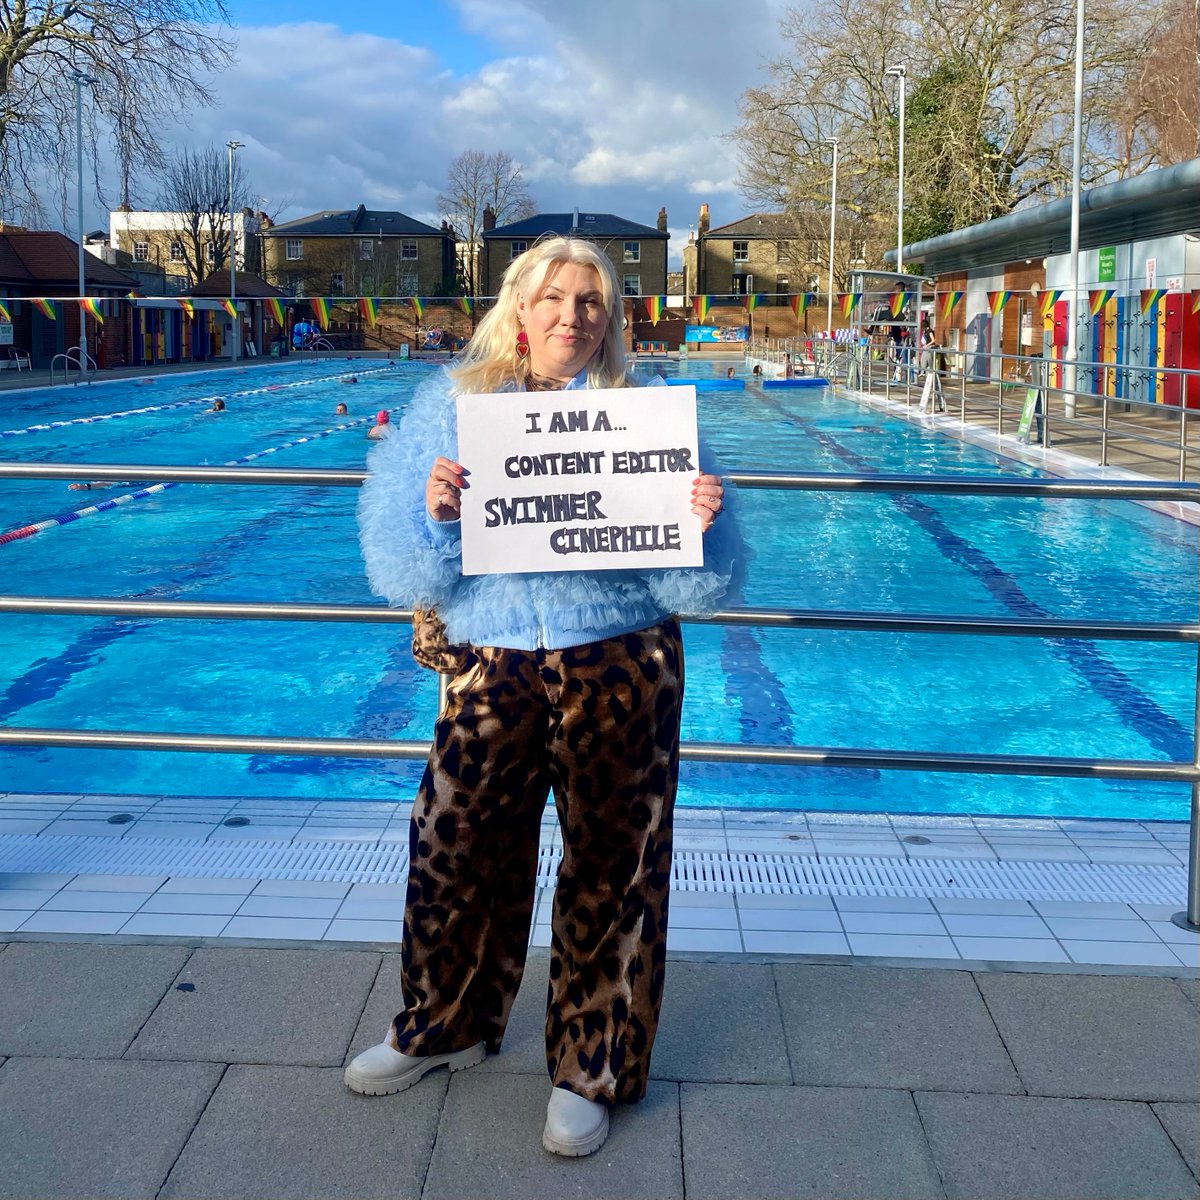 We help people get back to the business of living after stoma surgery 💜 Support others like @Nattyboobooo👉cafdonate.cafonline.org/25843 'As a swimmer, I worried how a stoma would affect my go-to mindfulness method. Thanks to Colostomy UK & the community, my concerns were unfounded!'